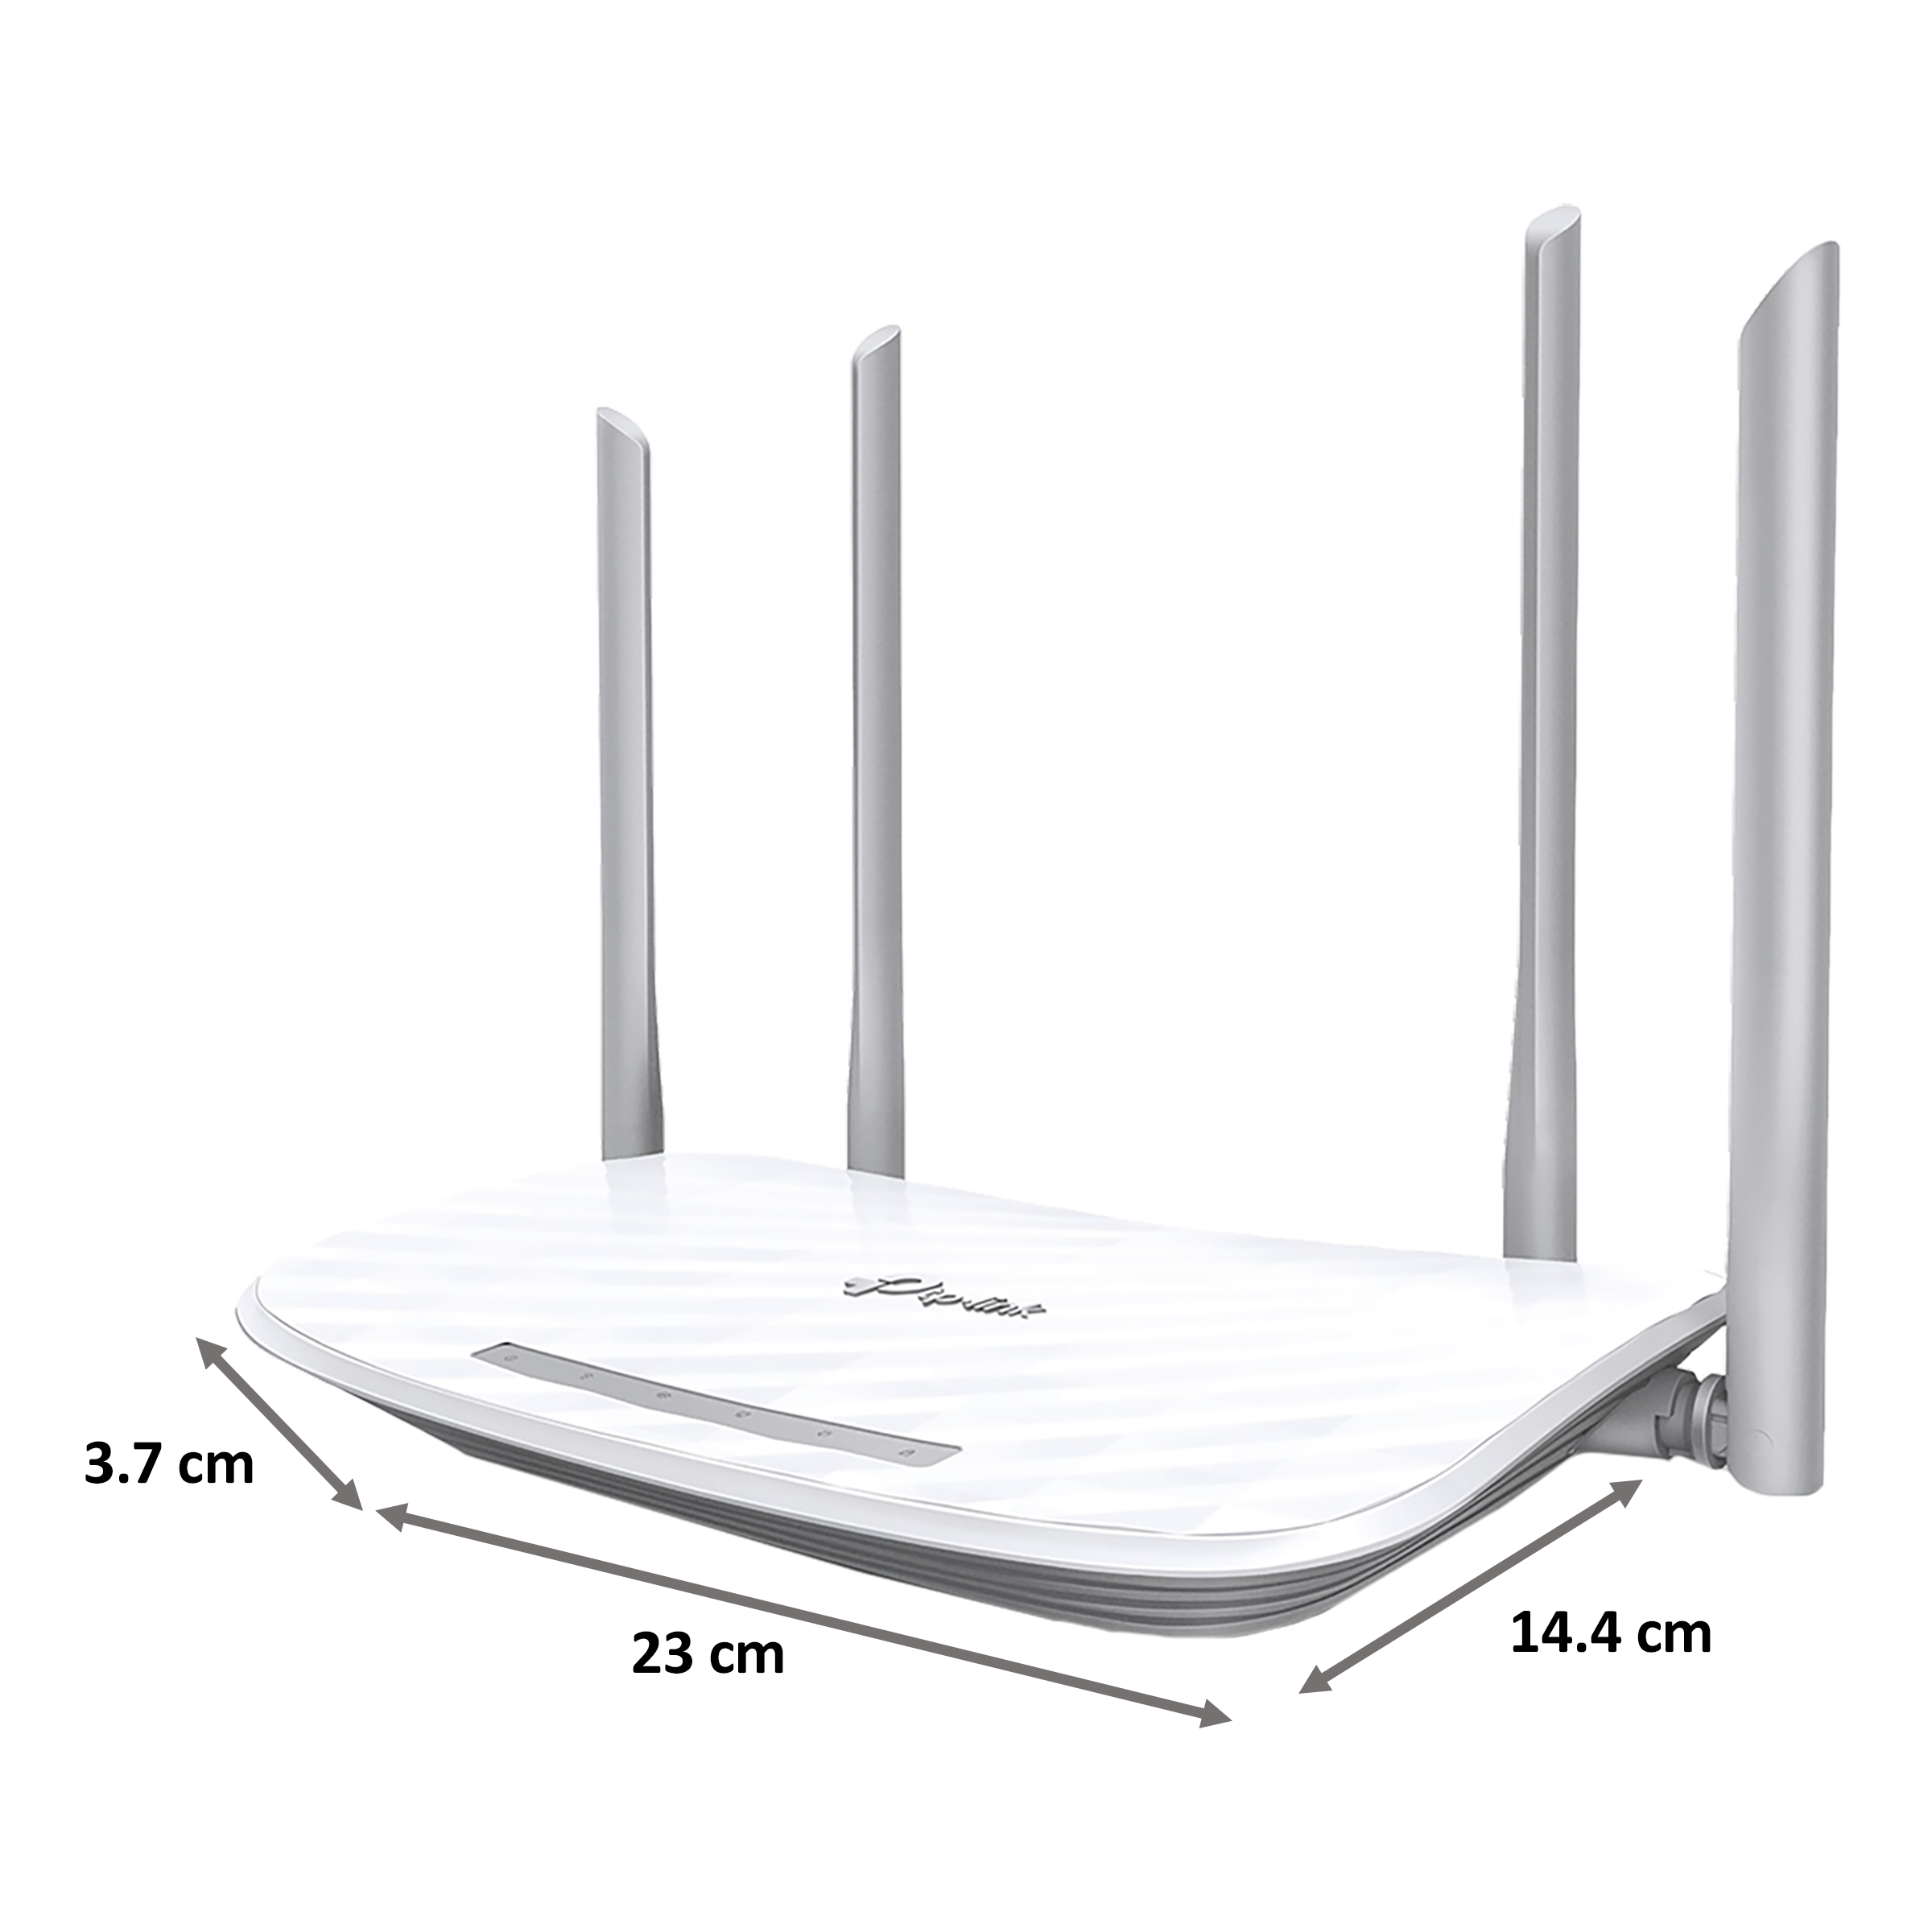 Tp-Link Archer C5 AC1200 Dual Band Wi-Fi Router (4 Antennas, 4 LAN Ports, Supports Multi-SSID, 450502277, White)_2